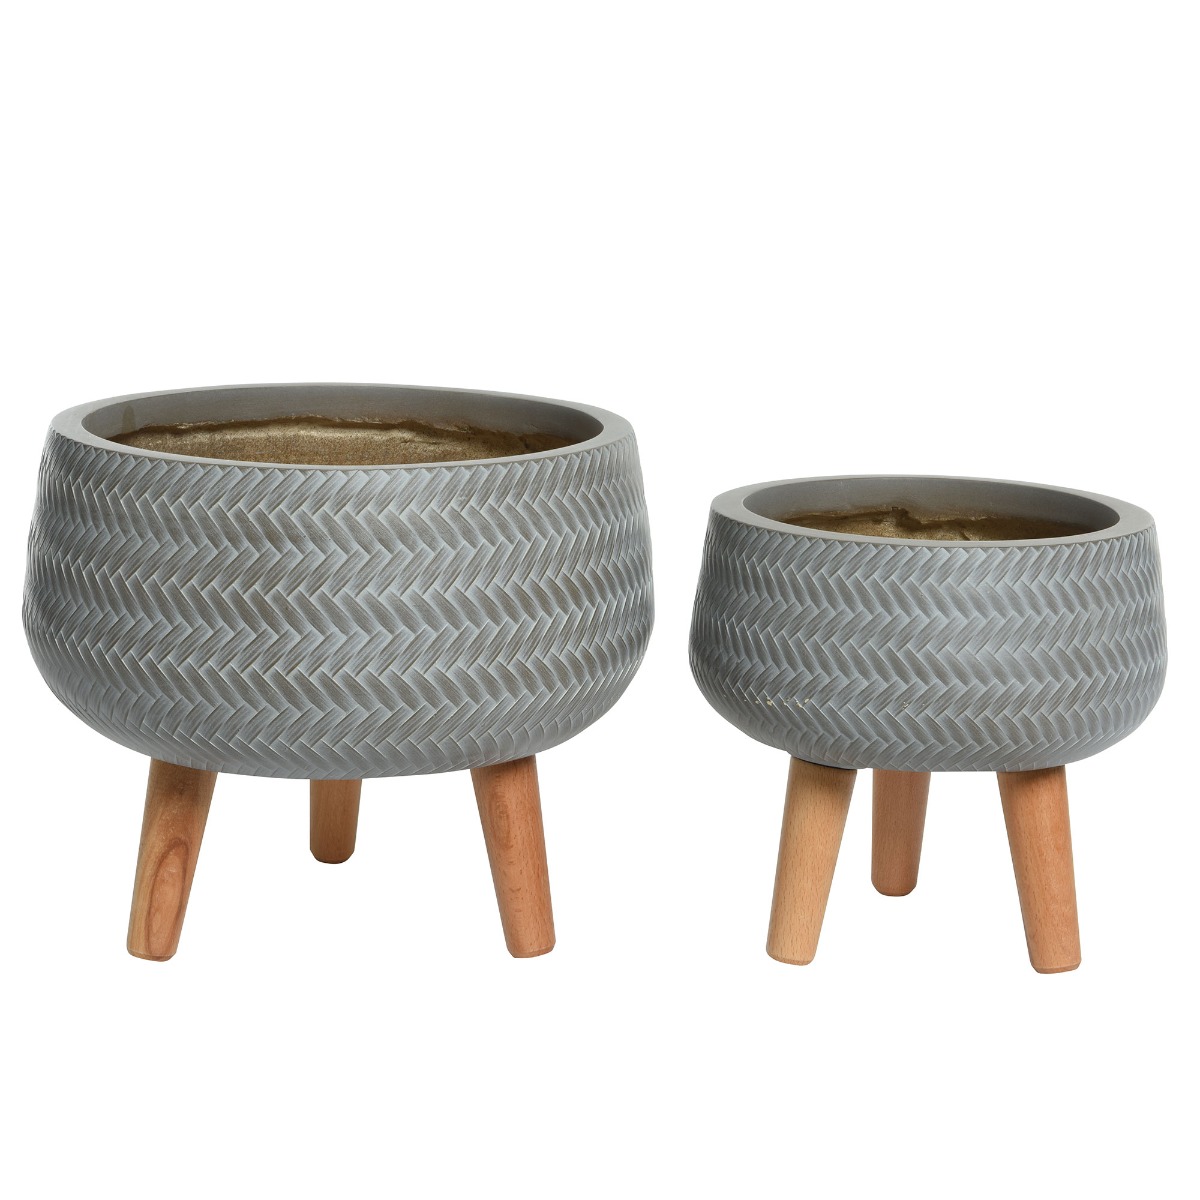 Photo of Round woven effect clay plant pot set in grey